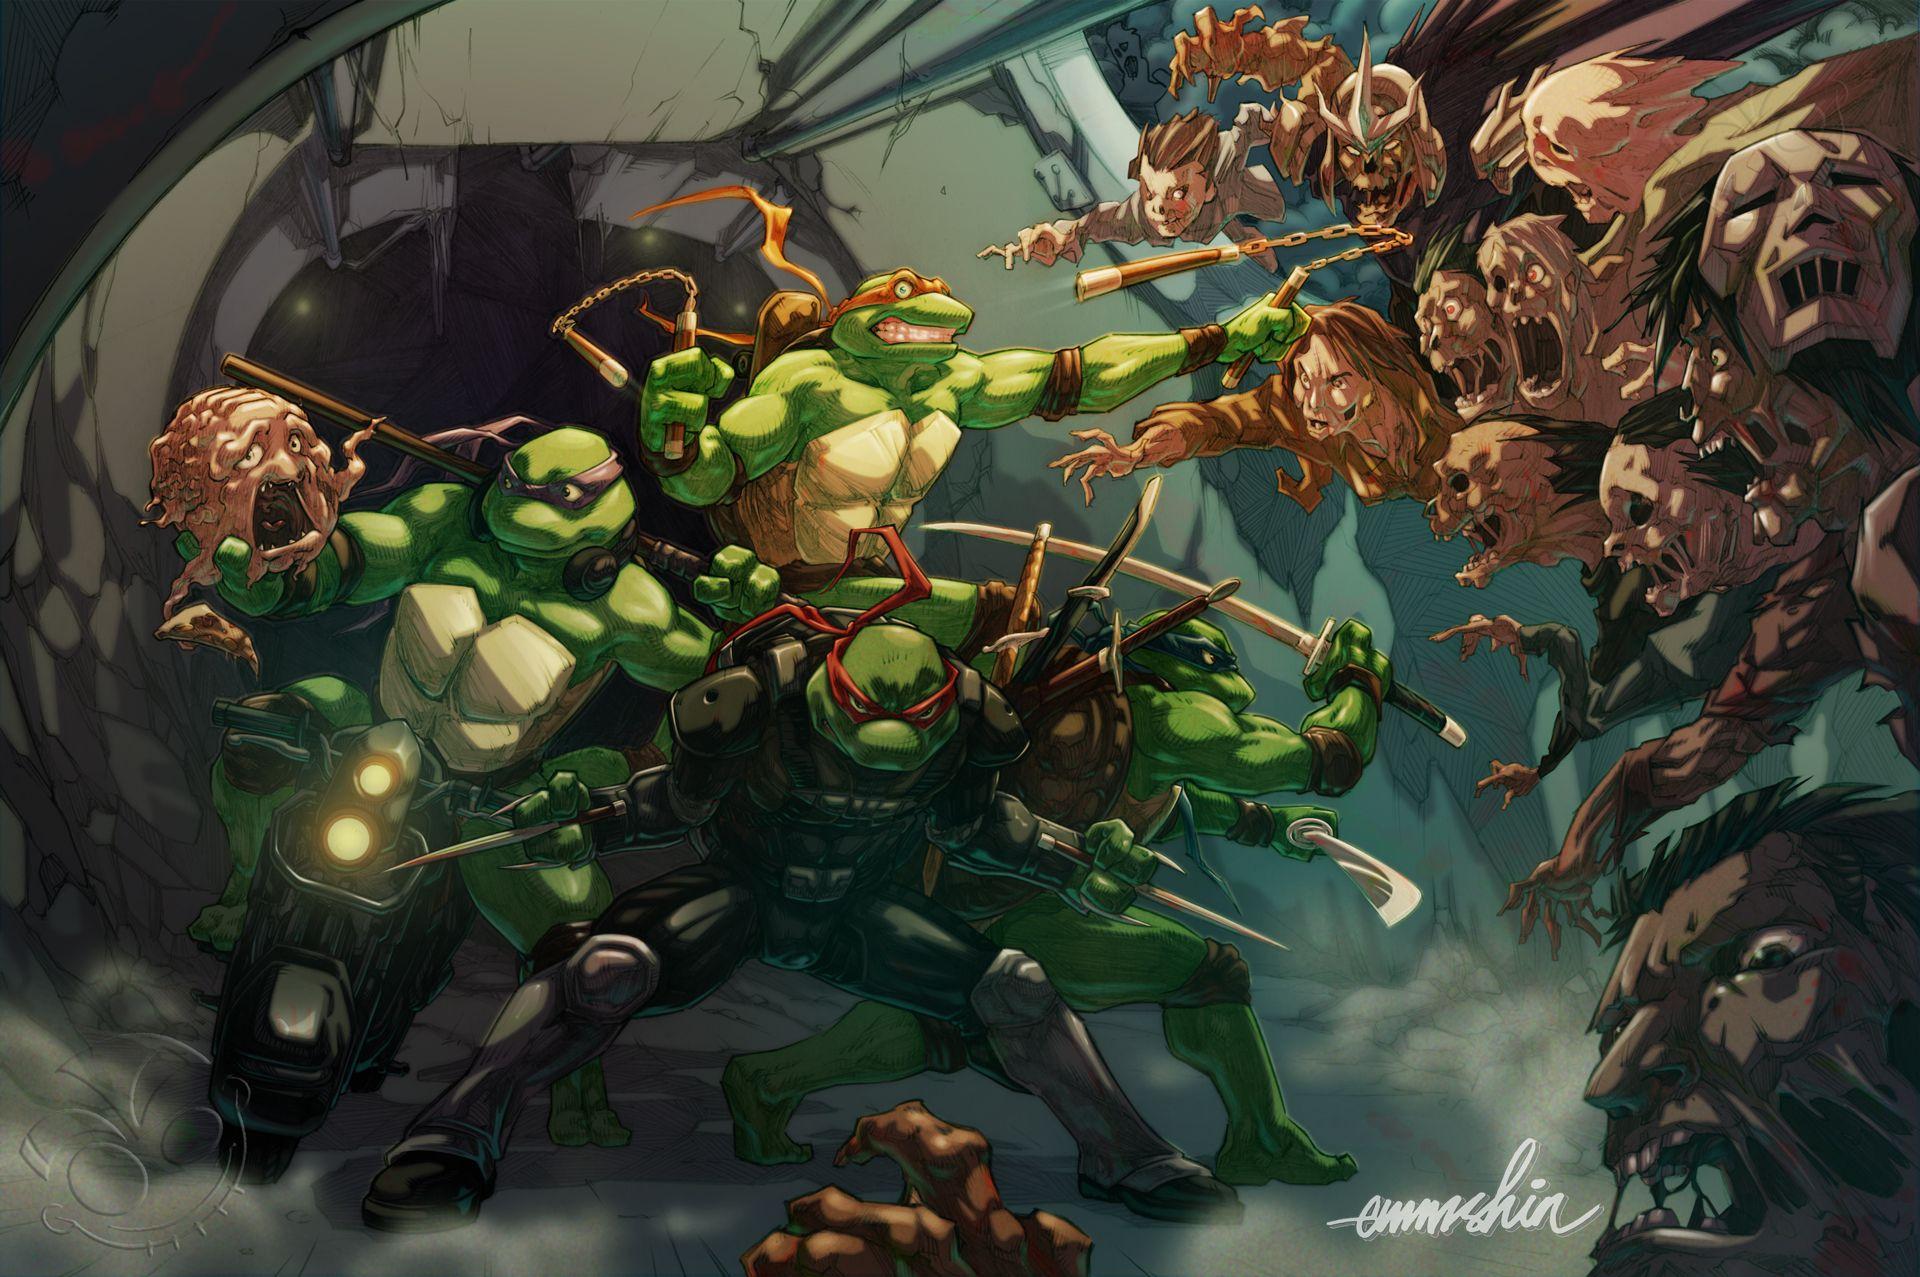 My TMNT Zombie Apocalypse concept fan art, also an entry to